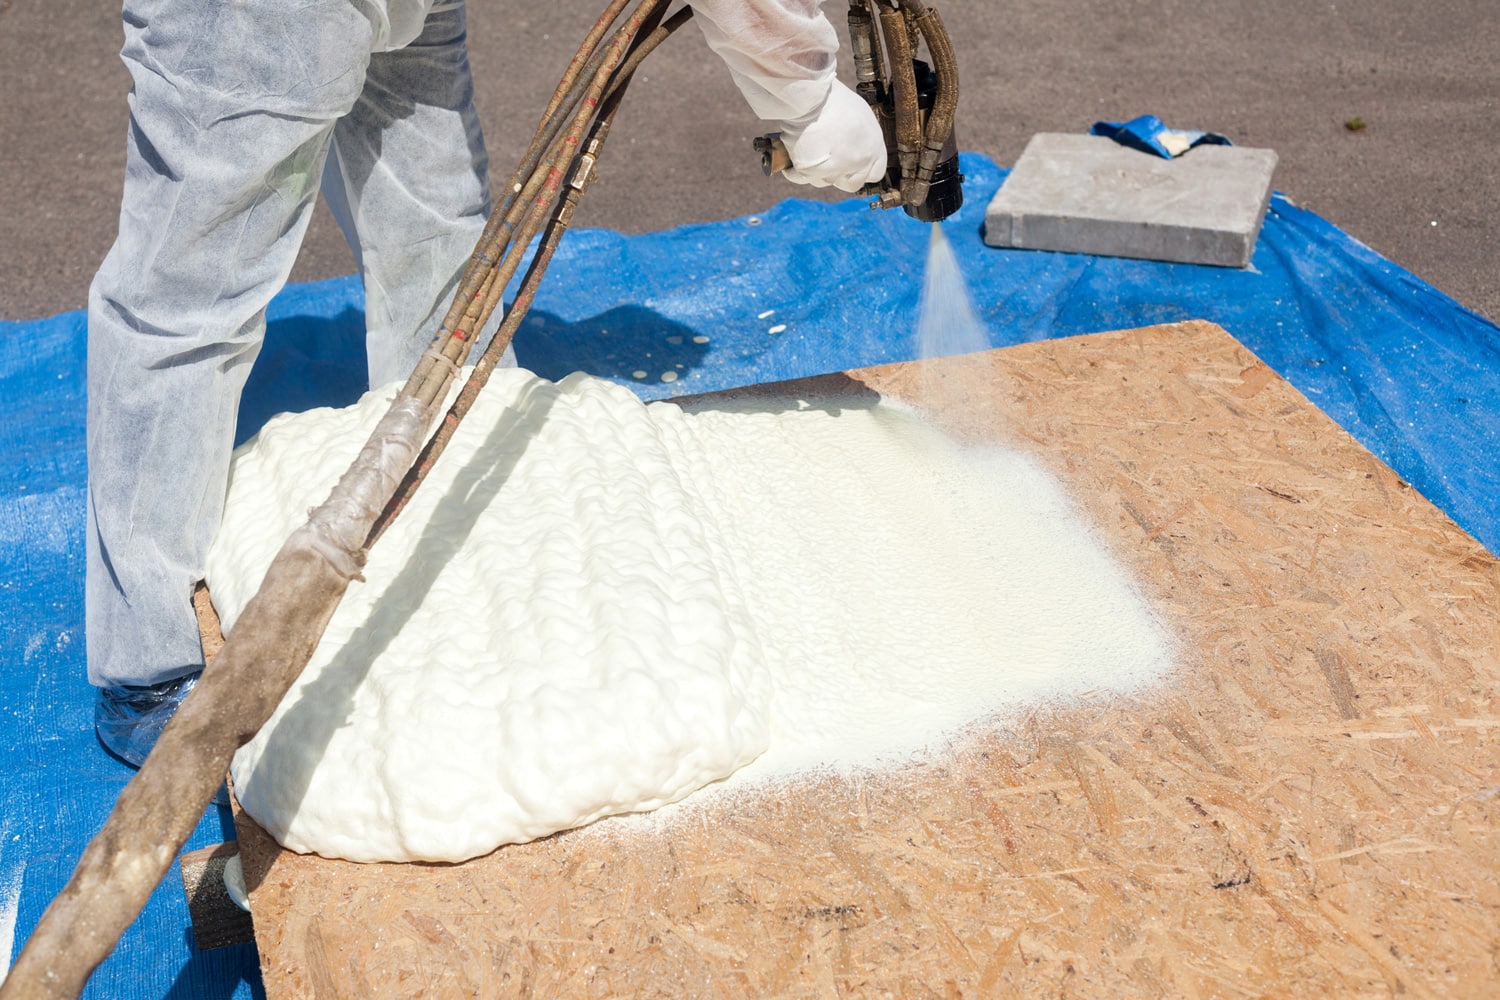 Close up view of technician dressed in a protective white uniform spraying foam insulation using Plural Component Spray Gun. Spraying polyurethane foam for roof and energy saving